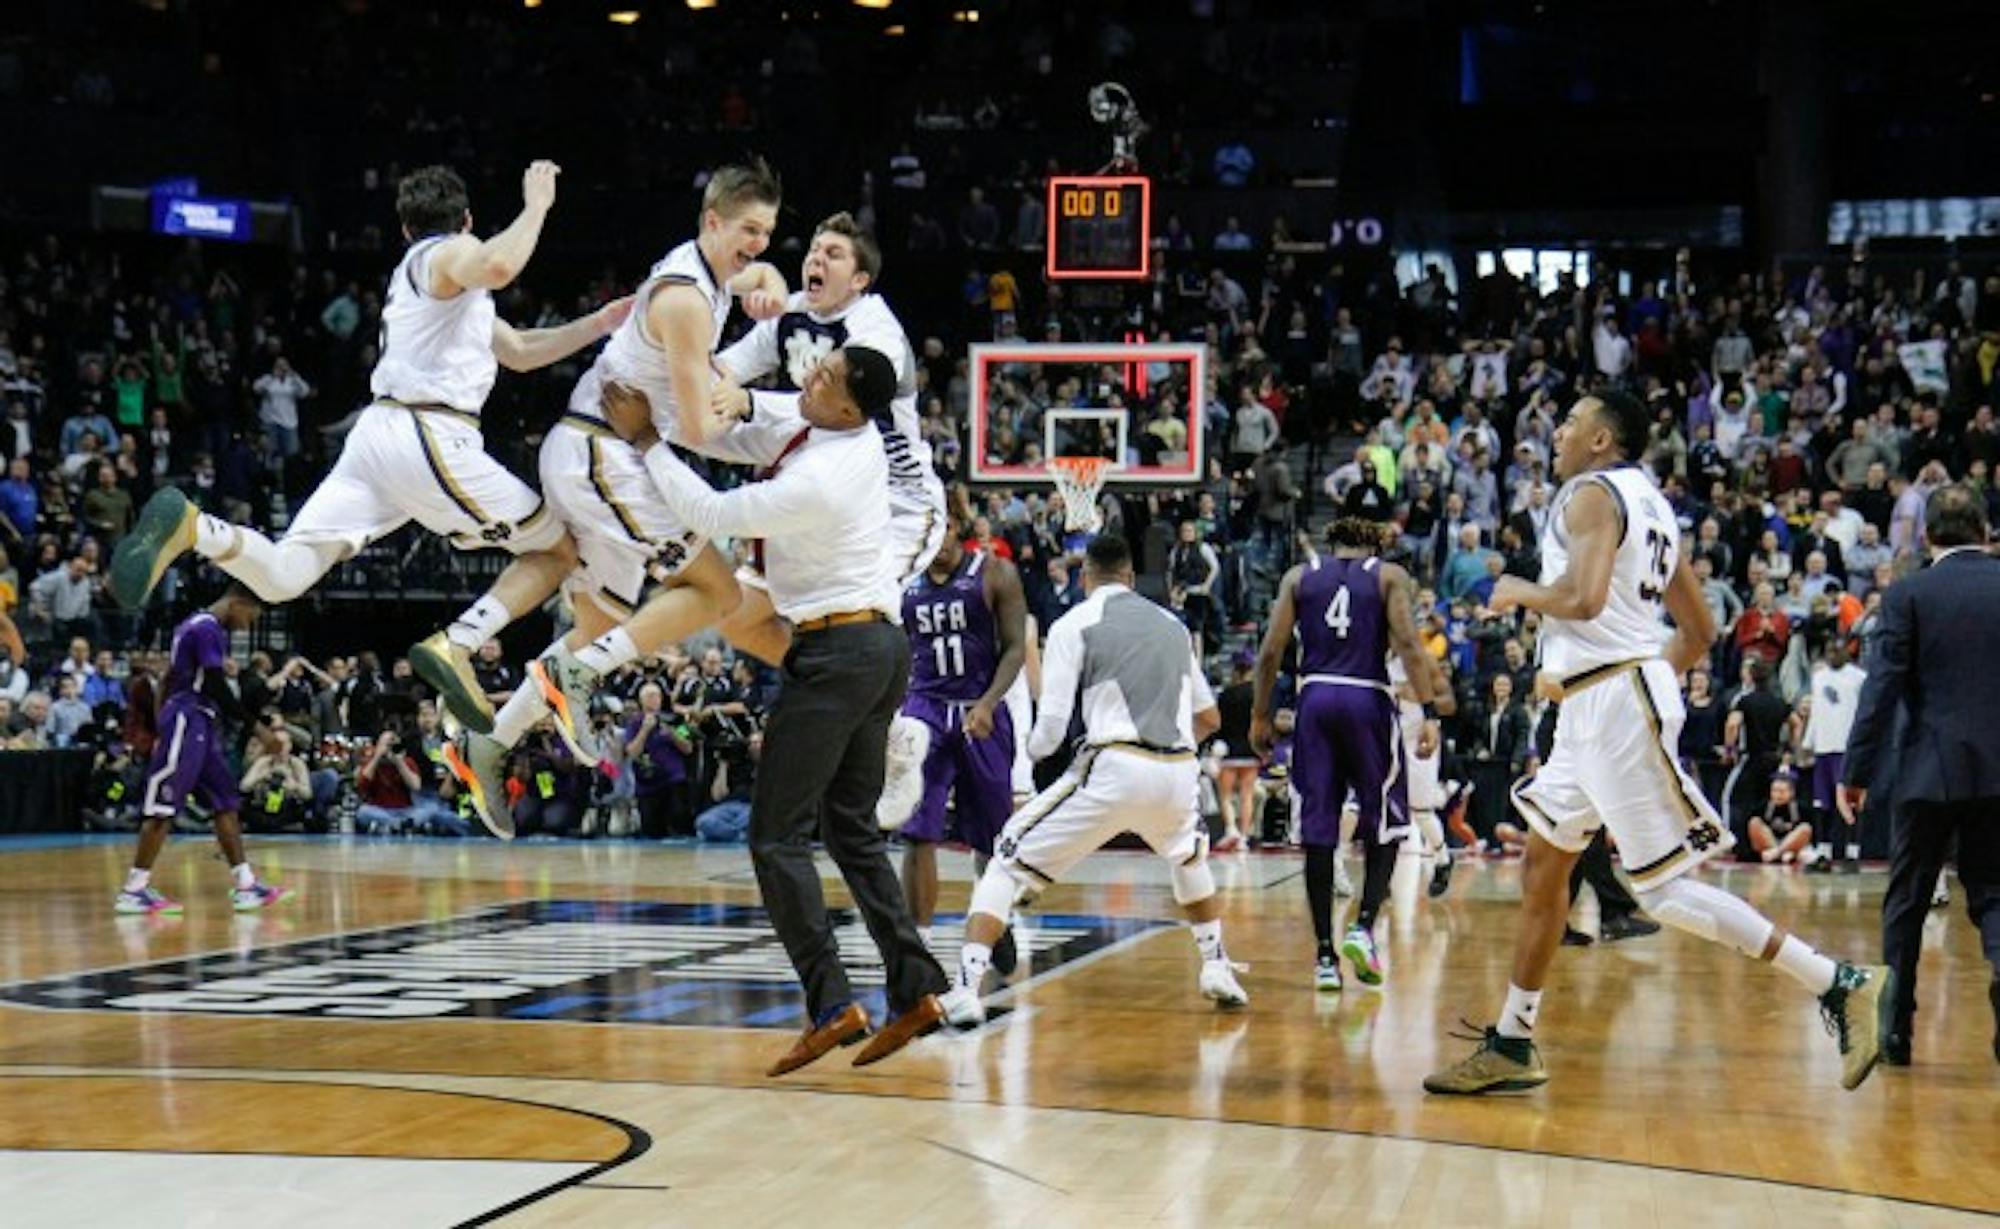 Irish players celebrate following the final buzzer in Notre Dame’s 76-75 win over Stephen F. Austin on Sunday at Barclays Center.